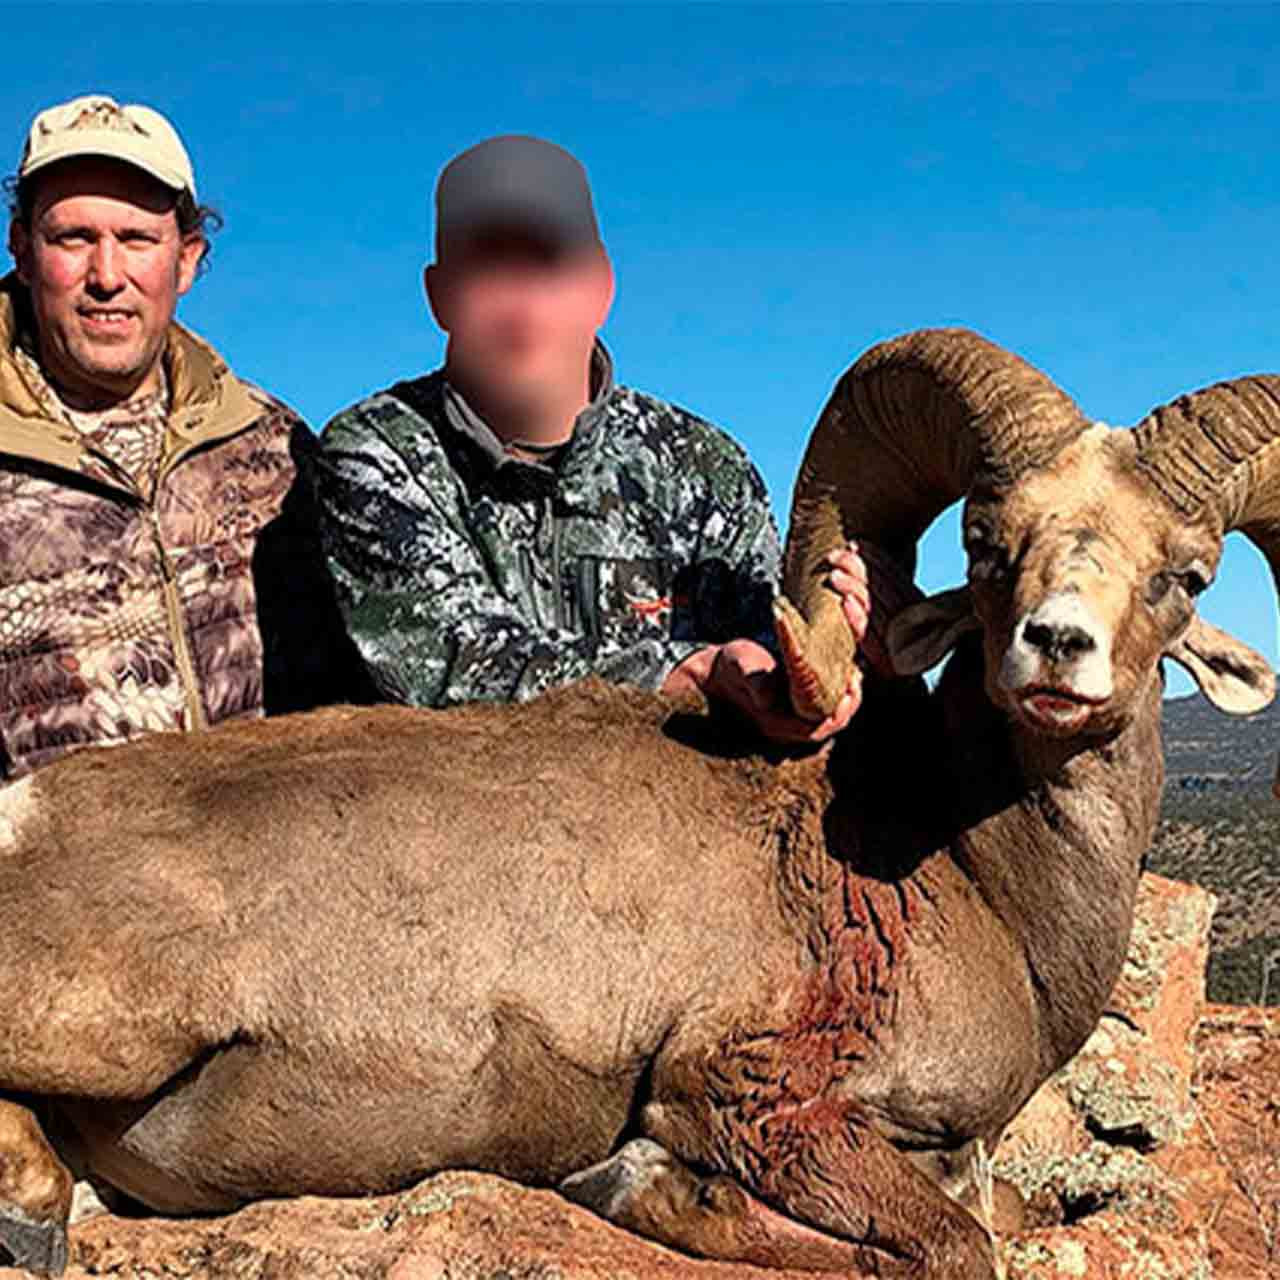 Desert sheep hunt in Sonora, Mexico